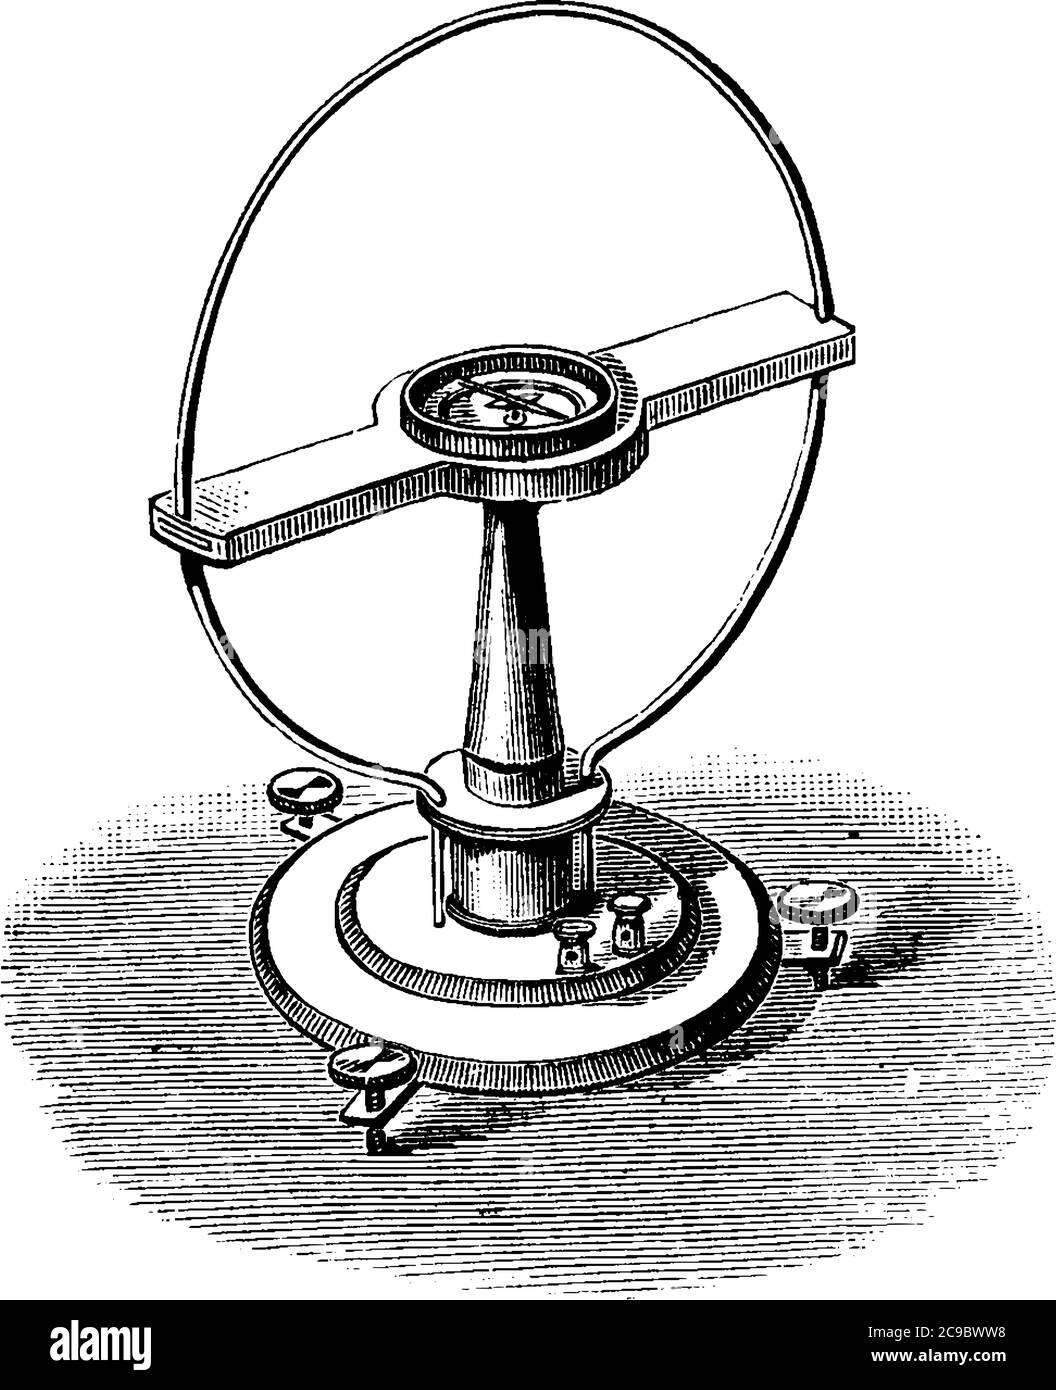 Tangent galvanometer is an early measuring instrument for small electric currents, vintage line drawing or engraving illustration. Stock Vector